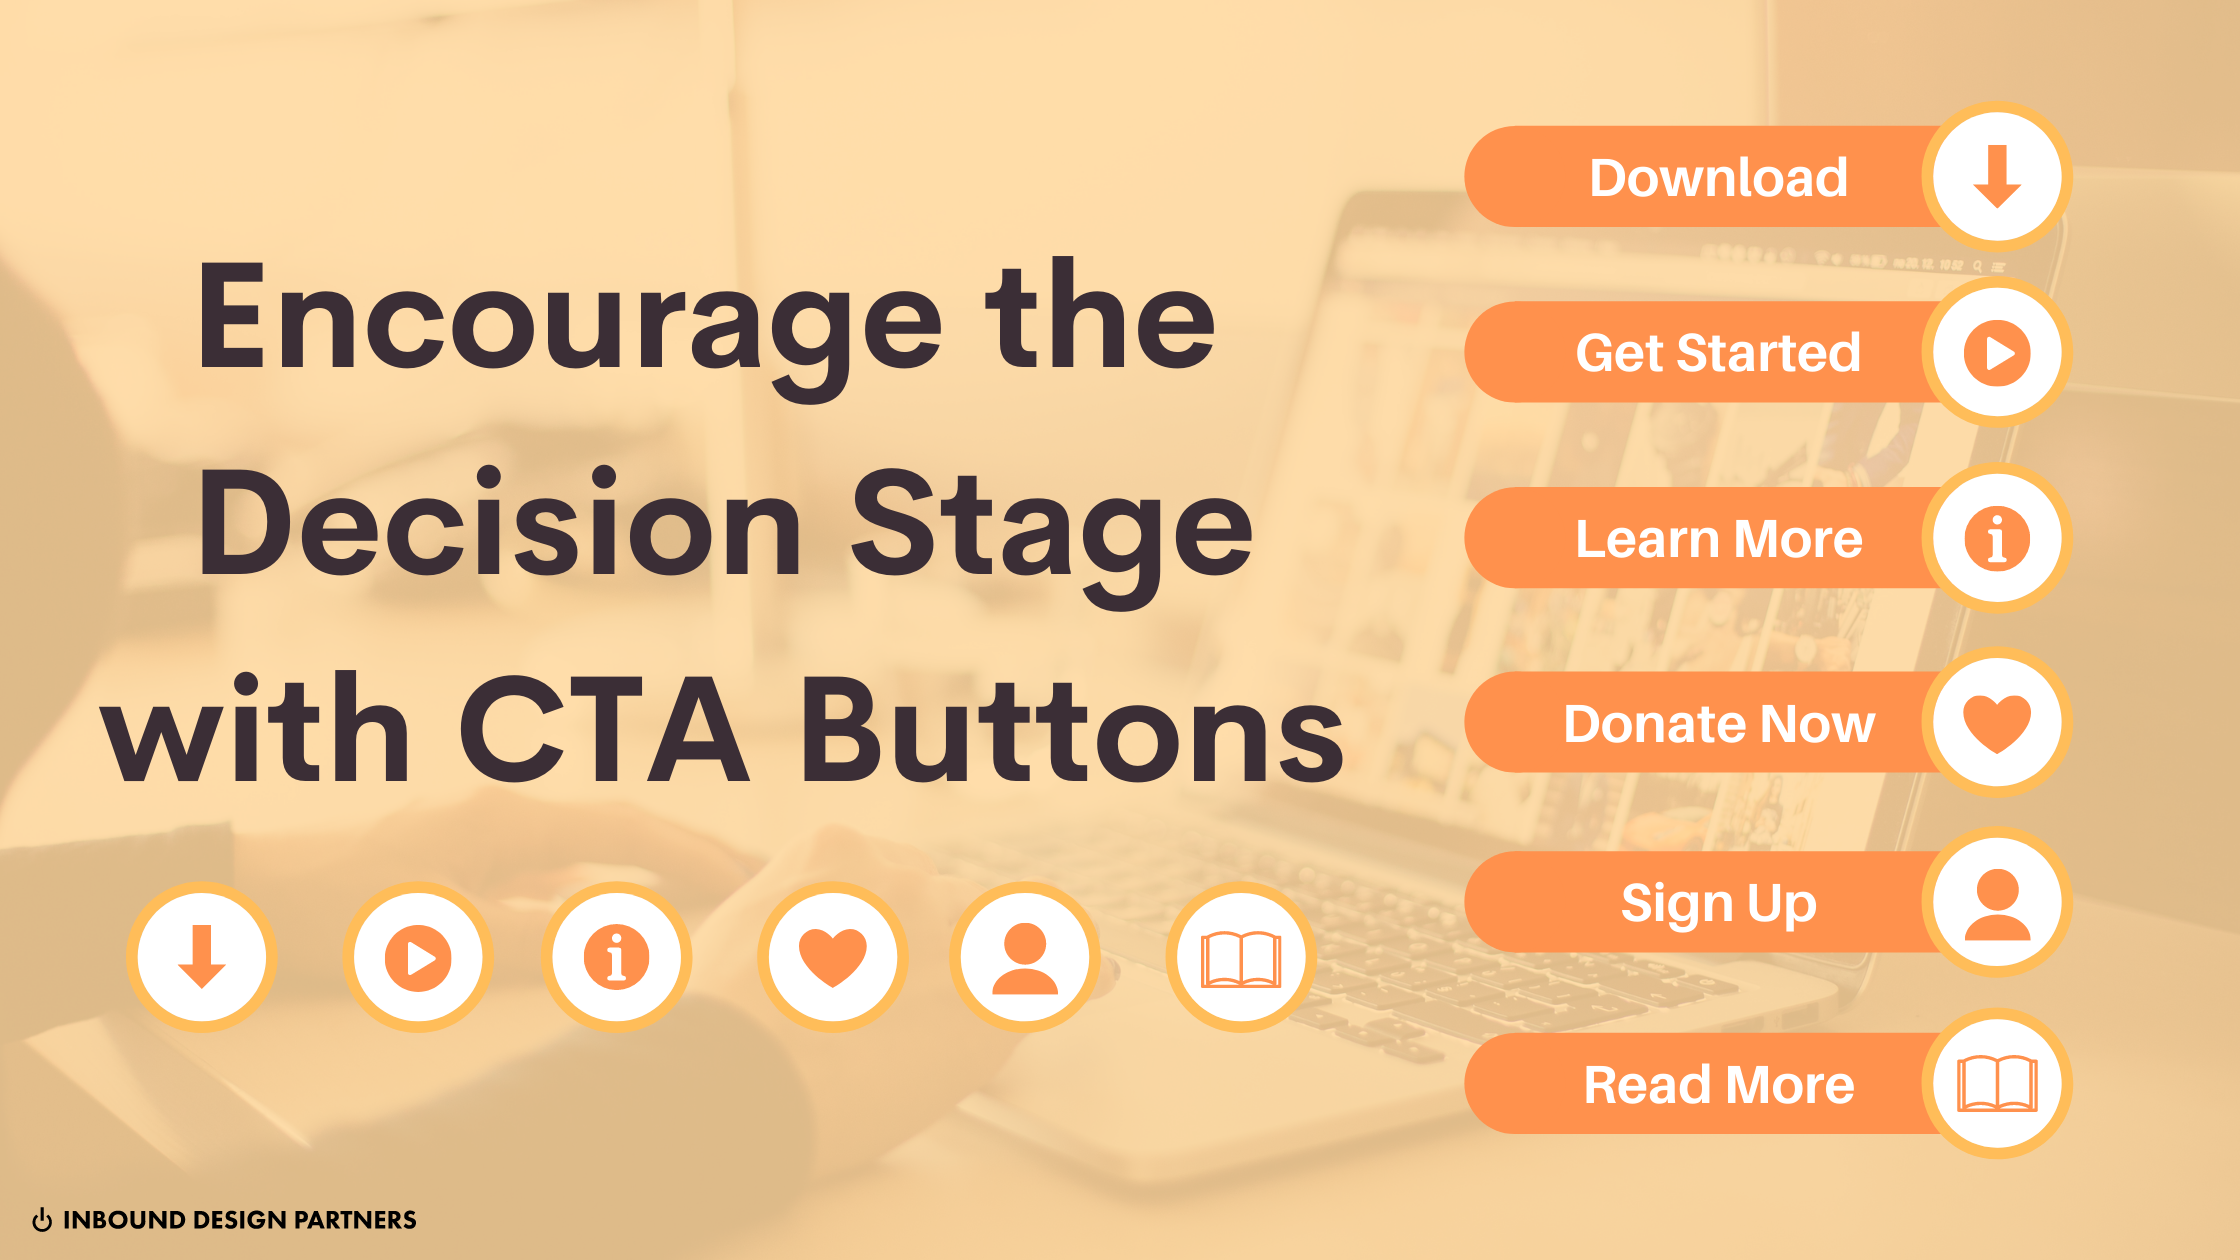 Encourage the decision stage with CTAs